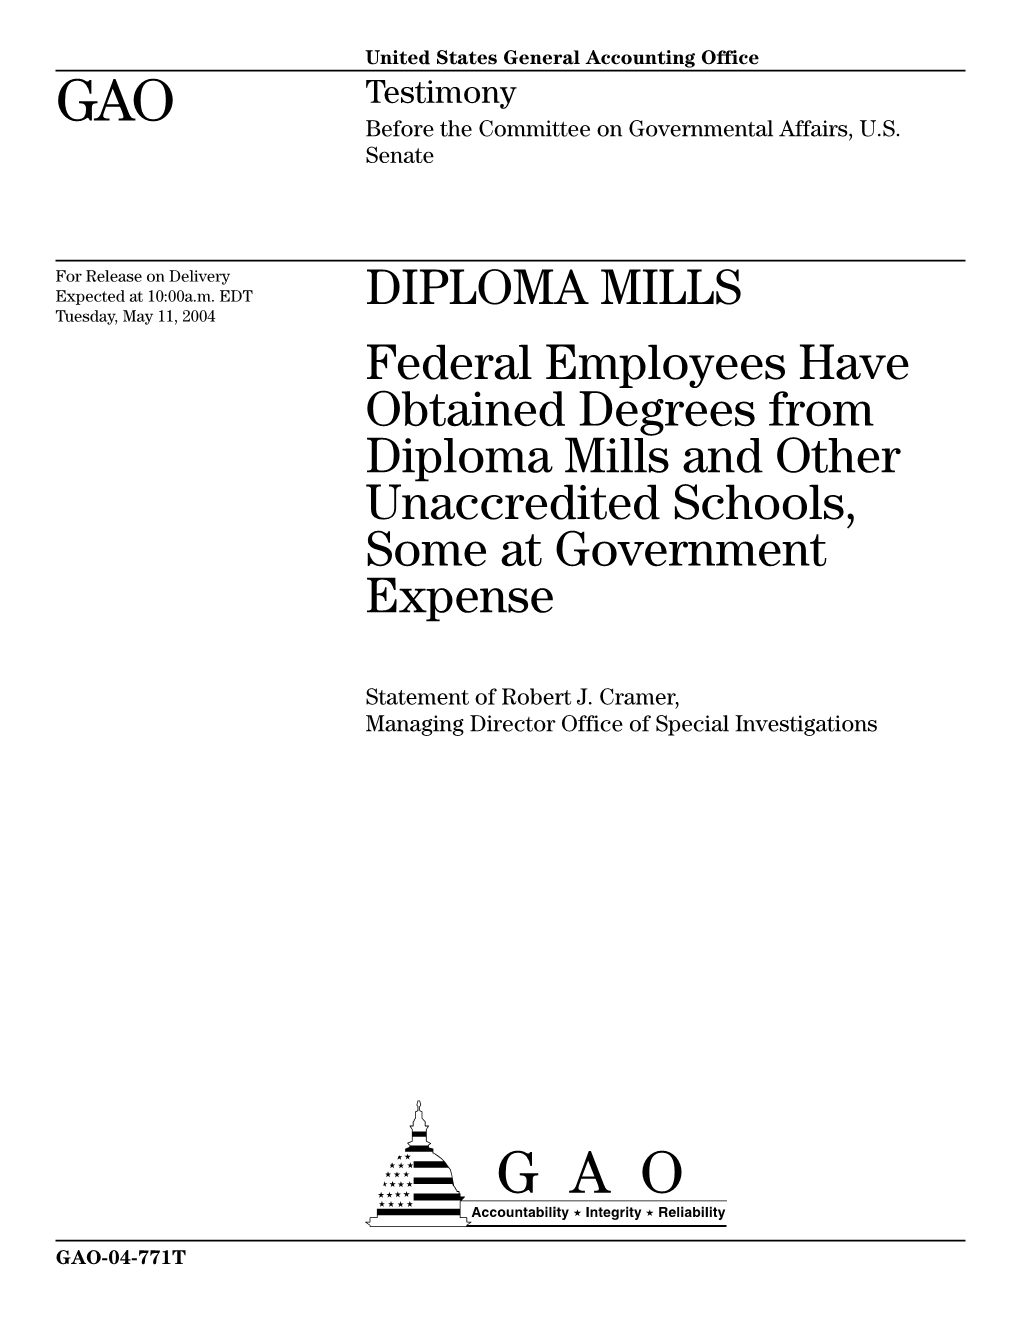 Federal Employees Have Obtained Degrees from Diploma Mills and Other Unaccredited Schools, Some at Government Expense